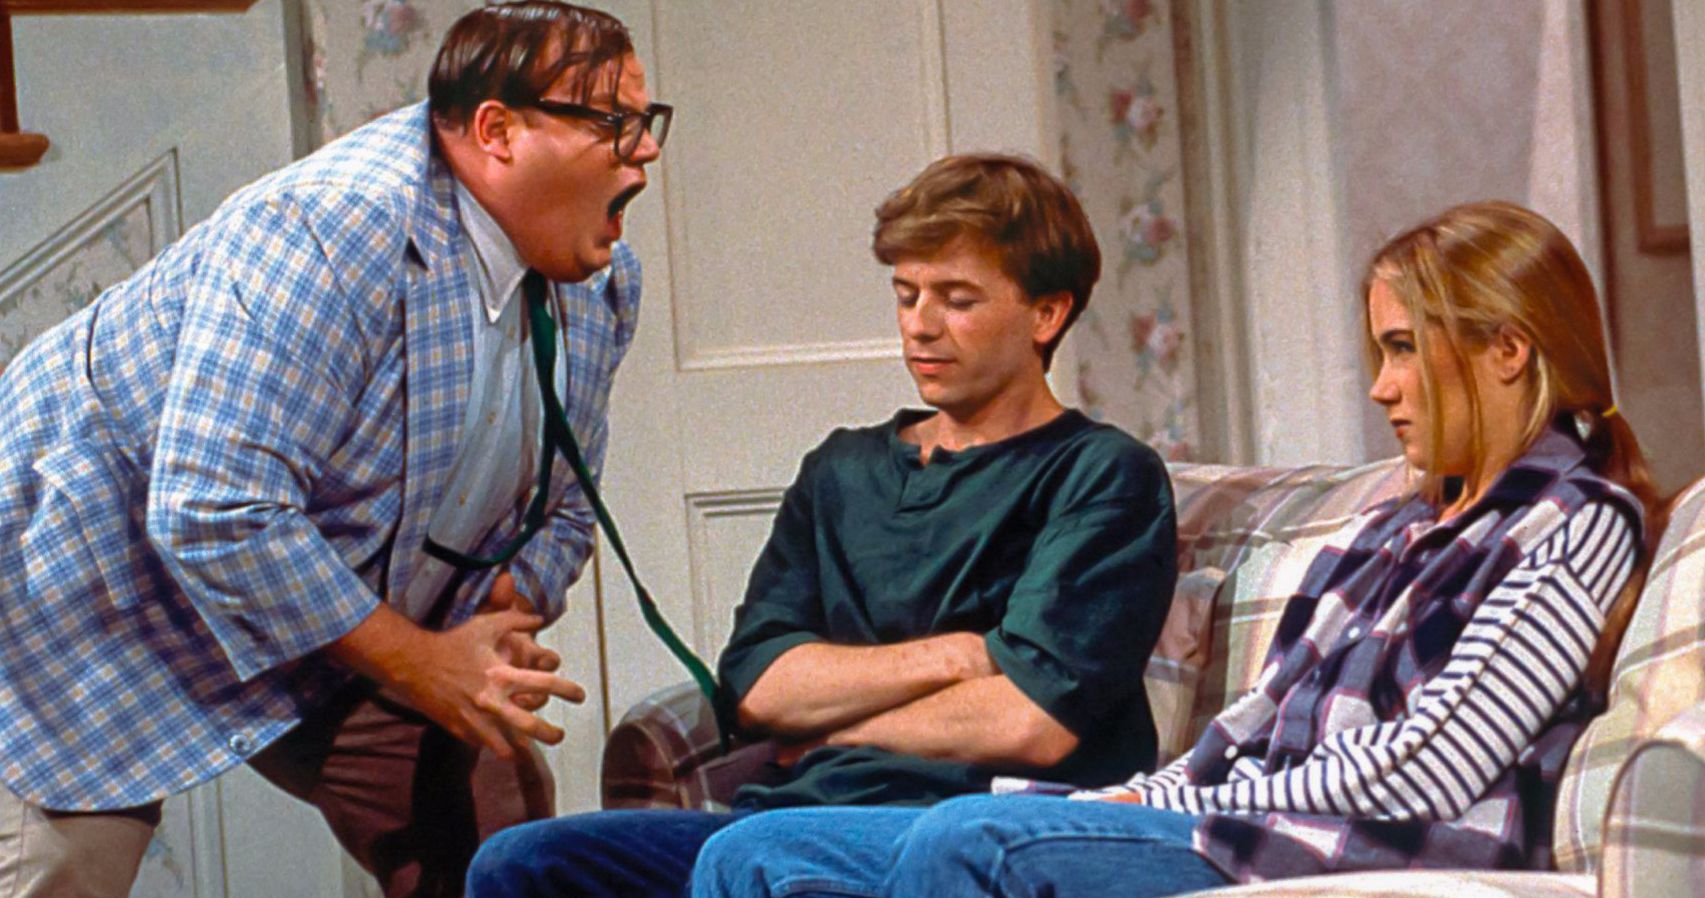 Bob Odenkirk Shares the Story Behind Chris Farley's 'Down by the River' SNL Sketch